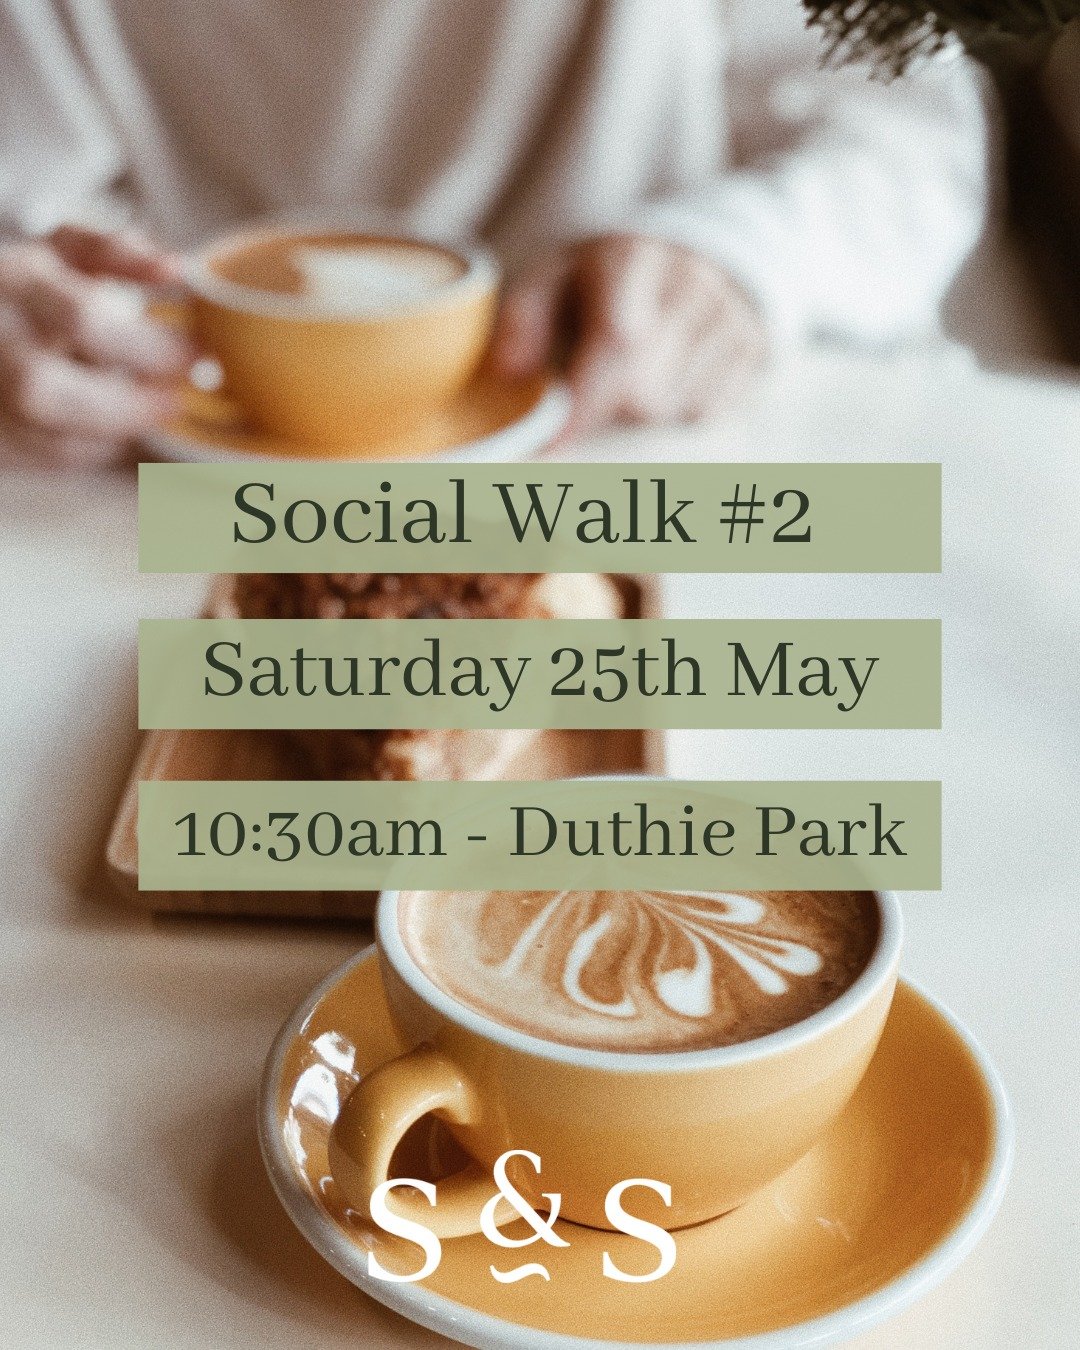 A wee reminder for our social walk👋

It's not going to be a major hike, or be a full-day event, we just want to meet up with you, go for a stroll and have a bit of a yap. It gets us moving, socialising and even the possibility of cake at the end is 